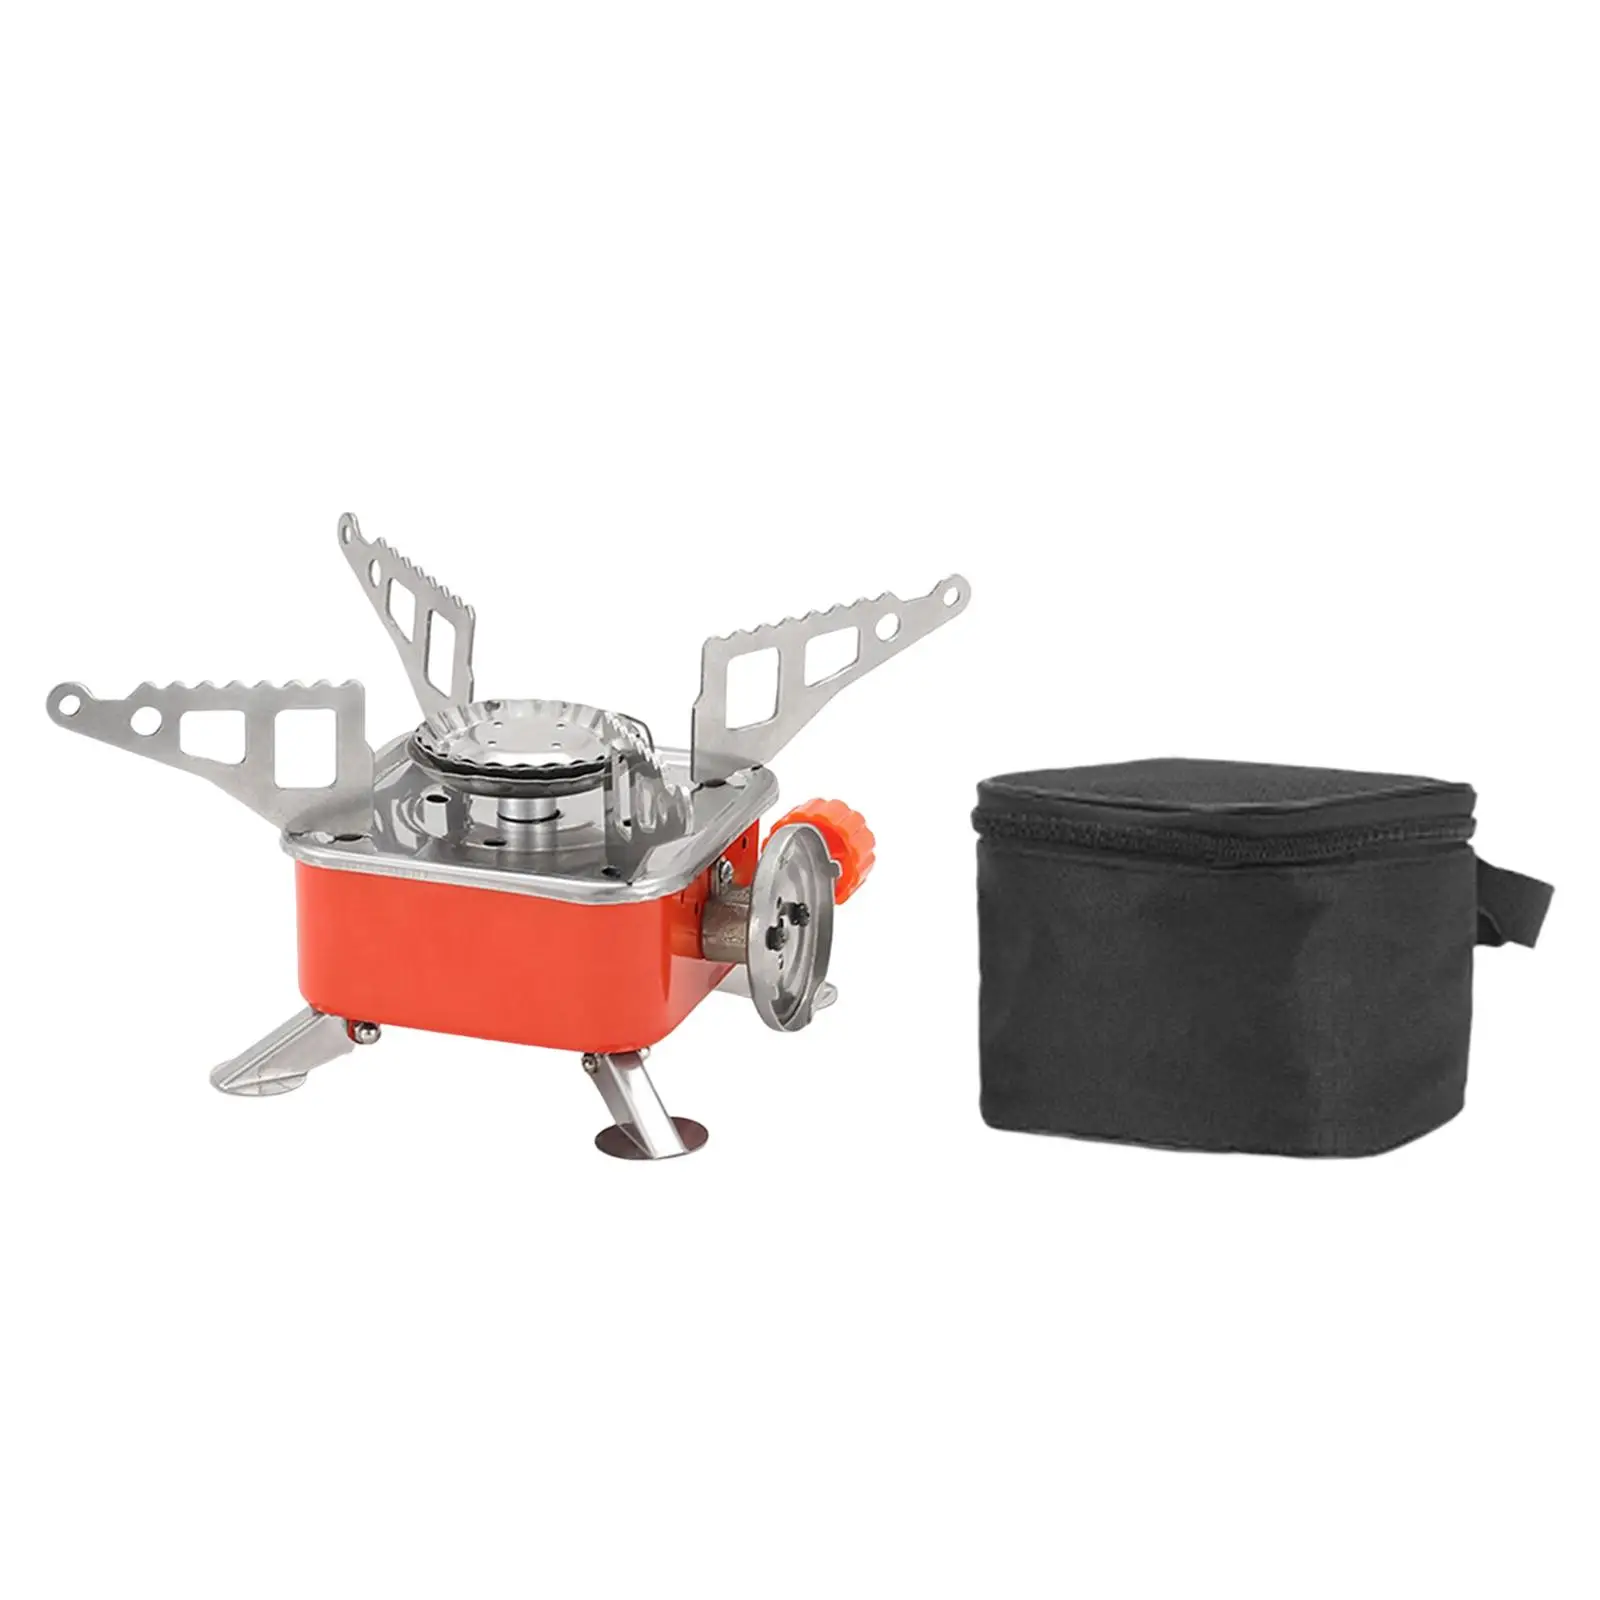 Portable Camping Gas Stove with Carrying Case Ultralight Foldable Cooking Cooker Gear Camp Stove for Backpacking Picnic Fishing